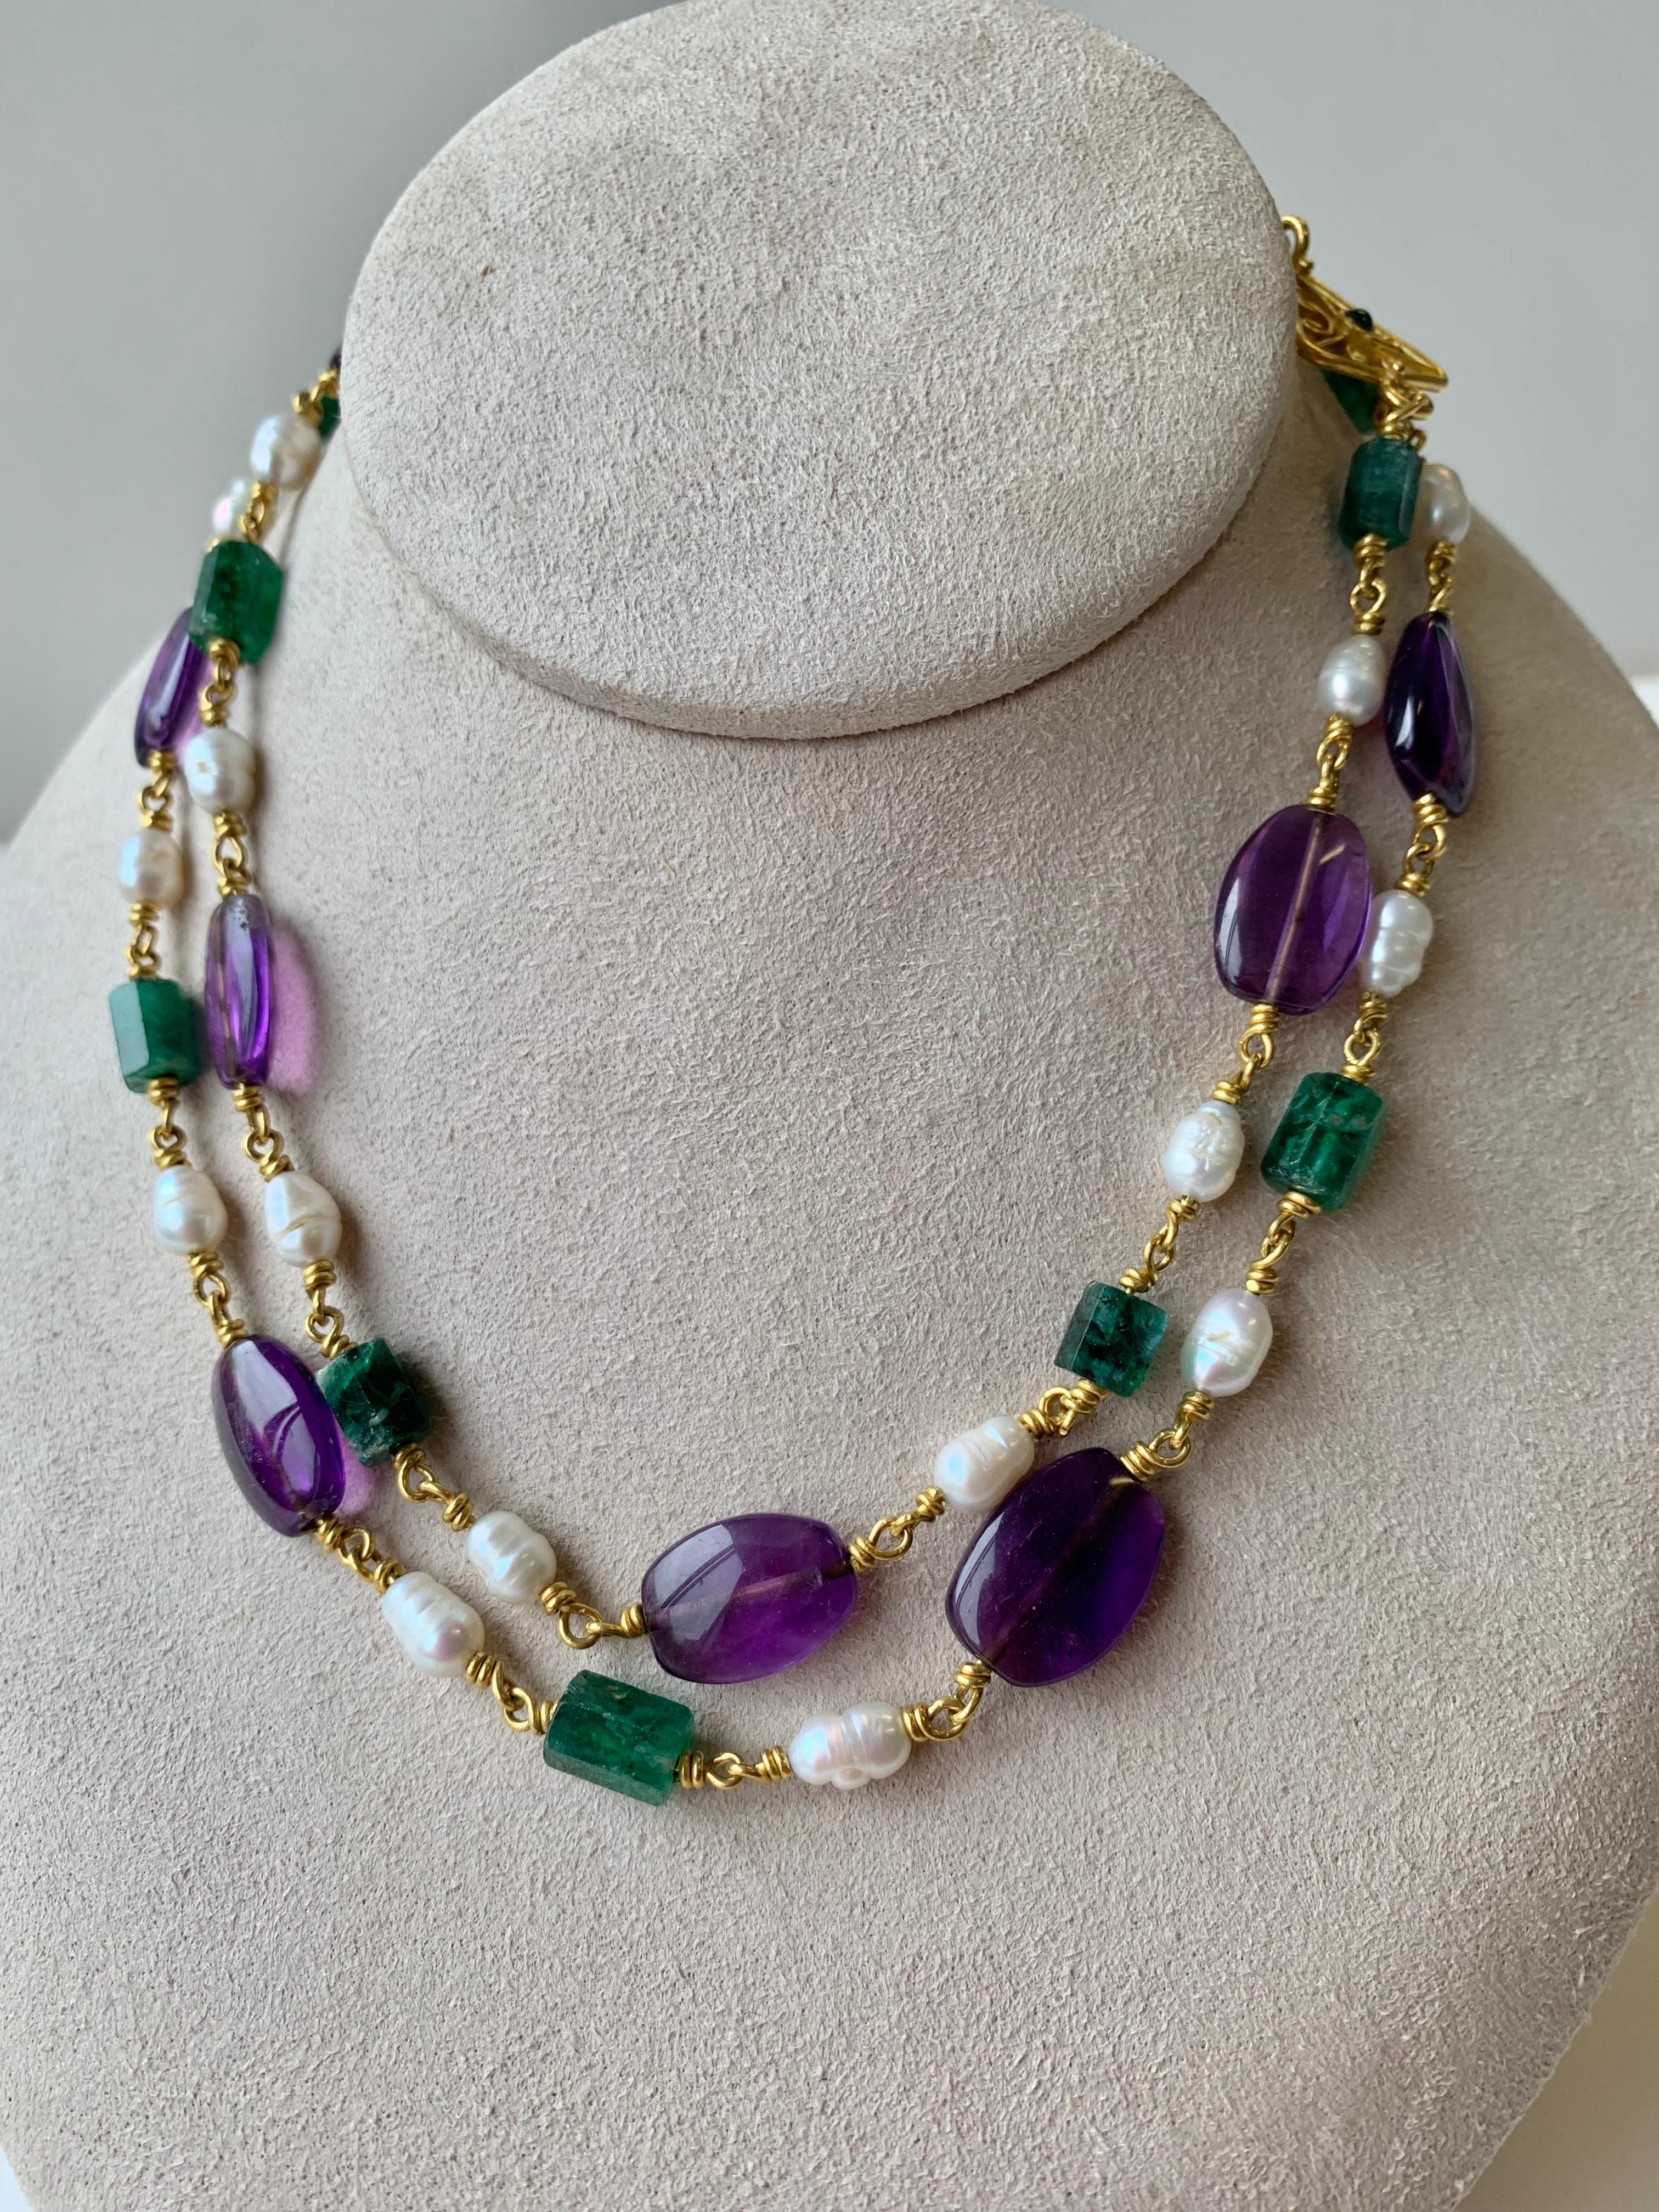 22 Karat gold necklace of Amethyst, emerald crystals and fresh water pearls in the manner of Roman 3rd century pieces. 
The neclace measures 32 inches, with  11 Emeralds weighing approximately 40 carats, 11 amethysts, the clasp is Amethyst and